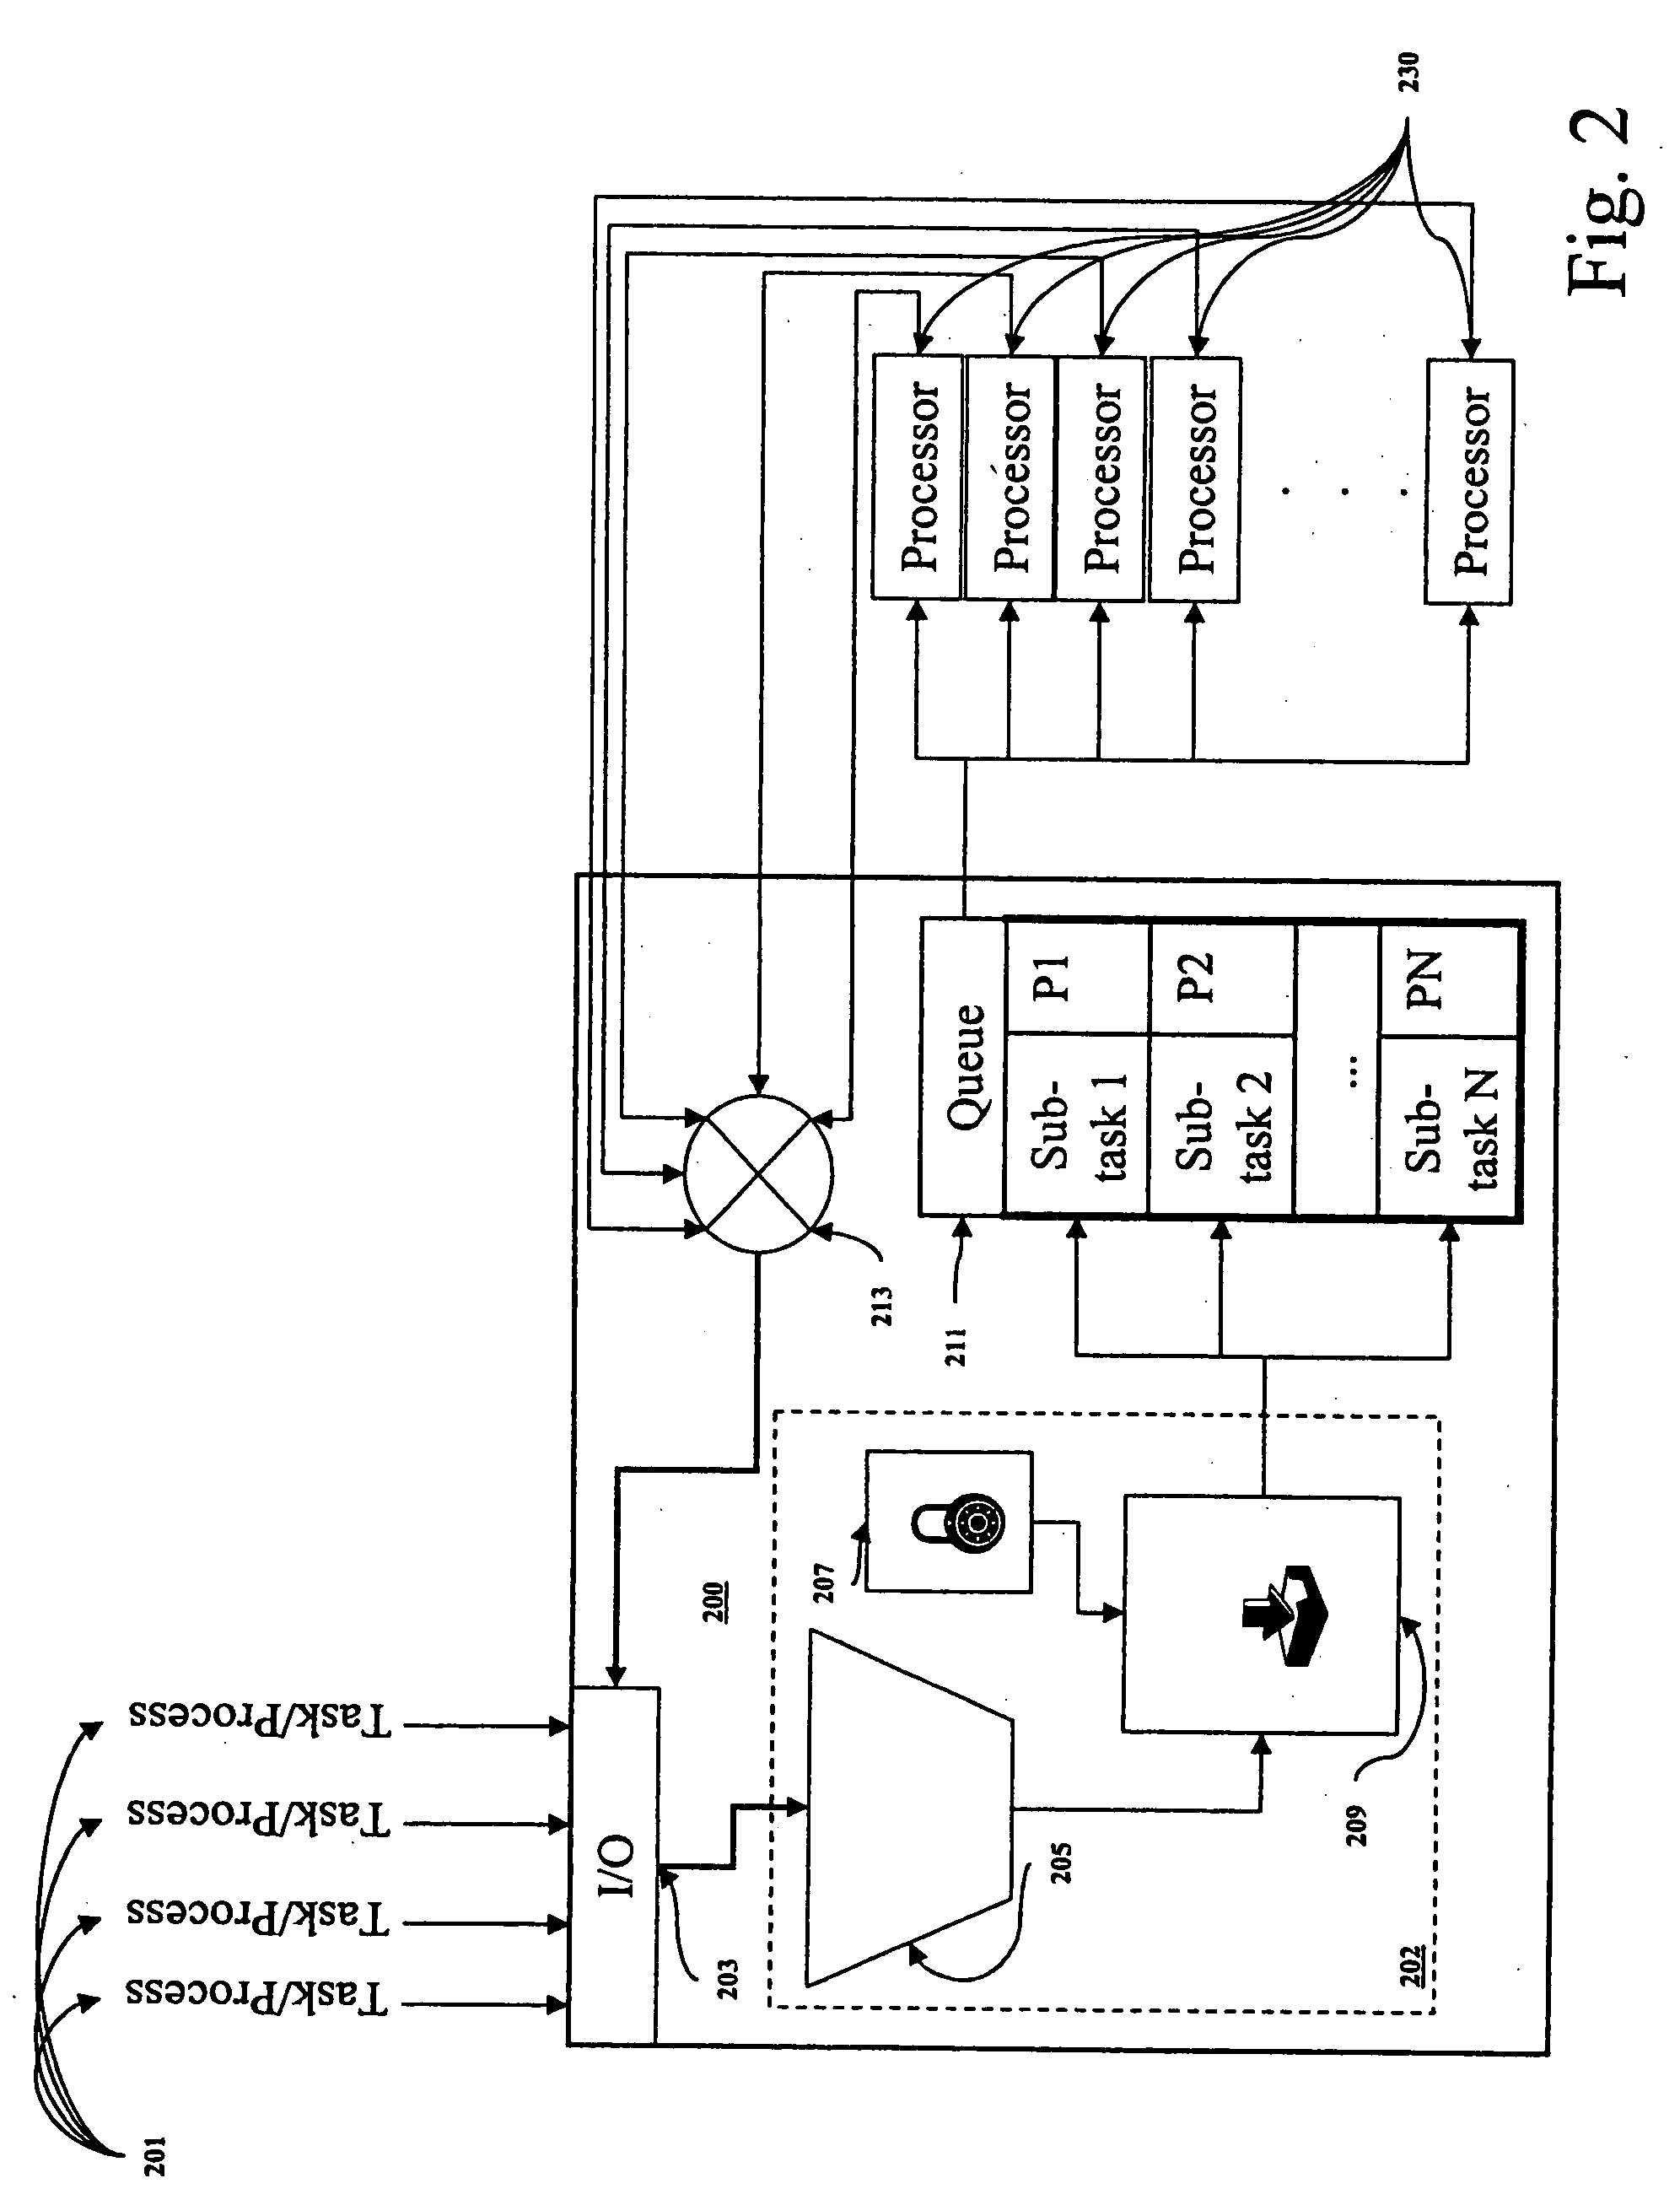 Operating system kernel-assisted, self-balanced, access-protected library framework in a run-to-completion multi-processor environment